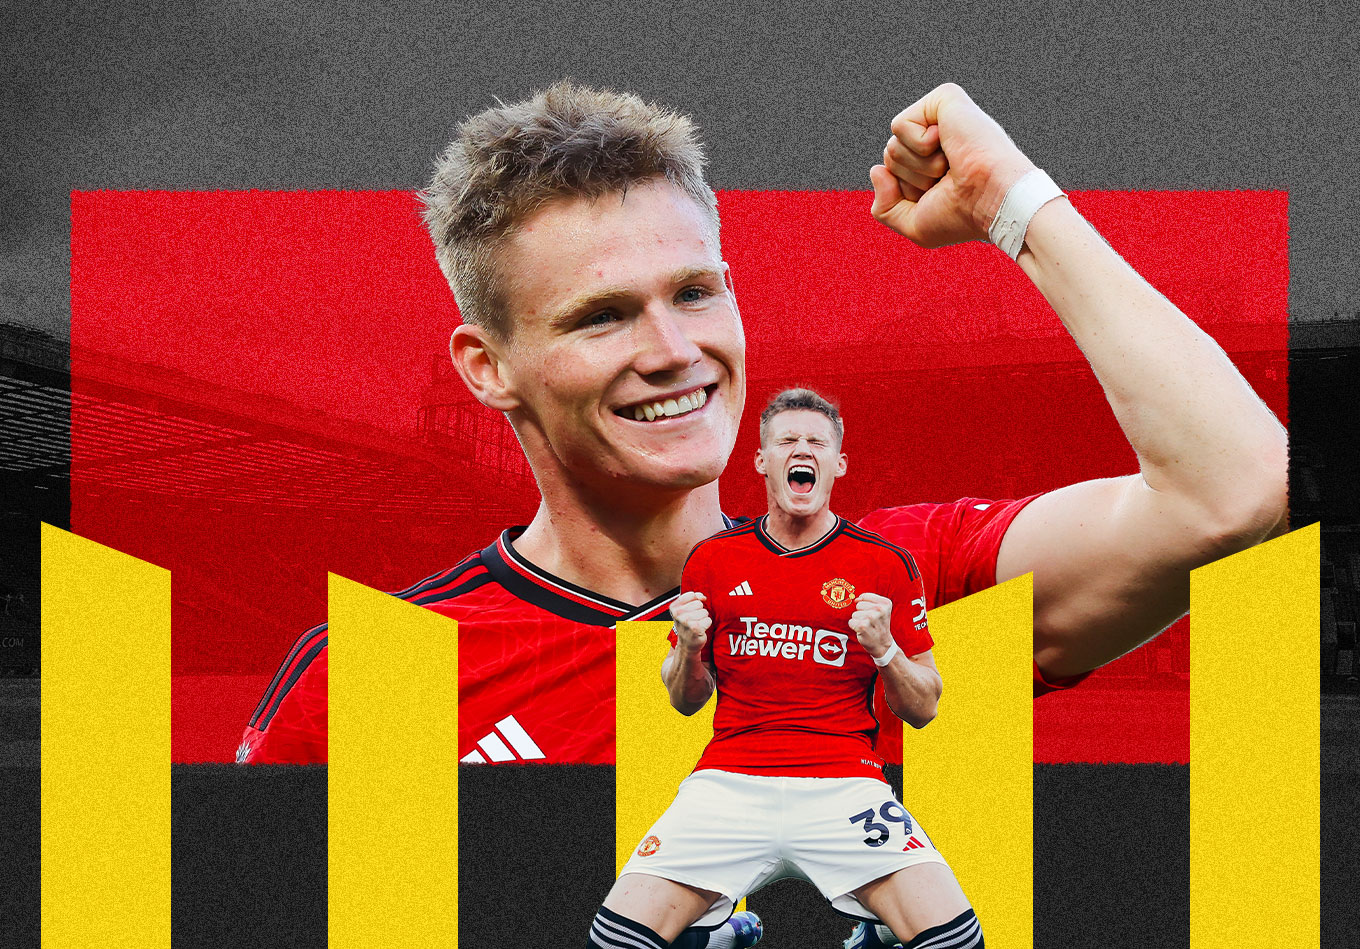 McSauce of Confusion: Why Scott McTominay Divides Opinion